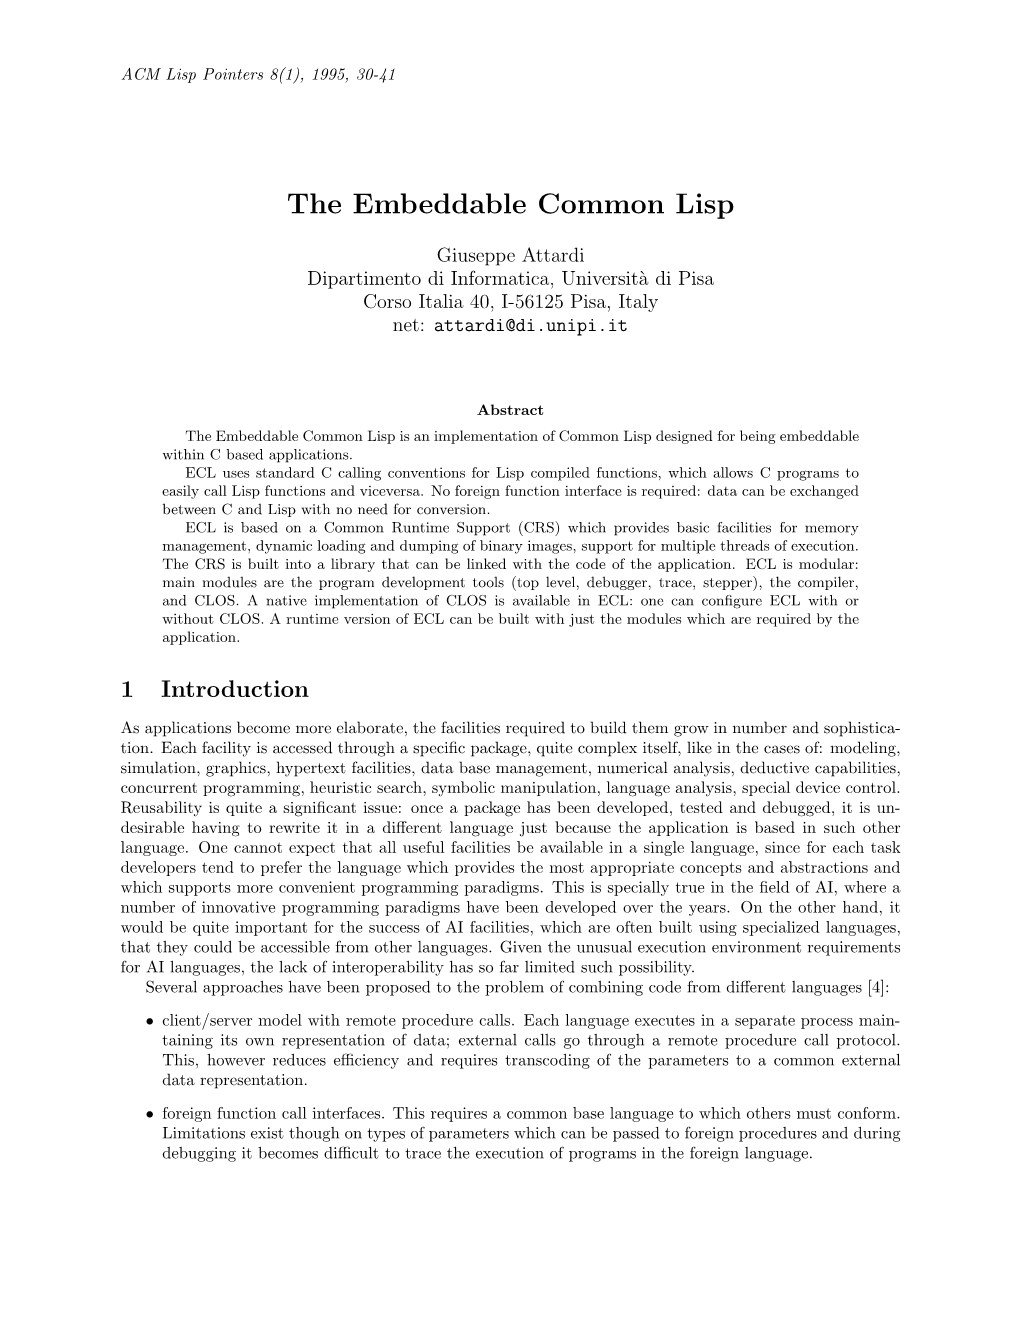 The Embeddable Common Lisp